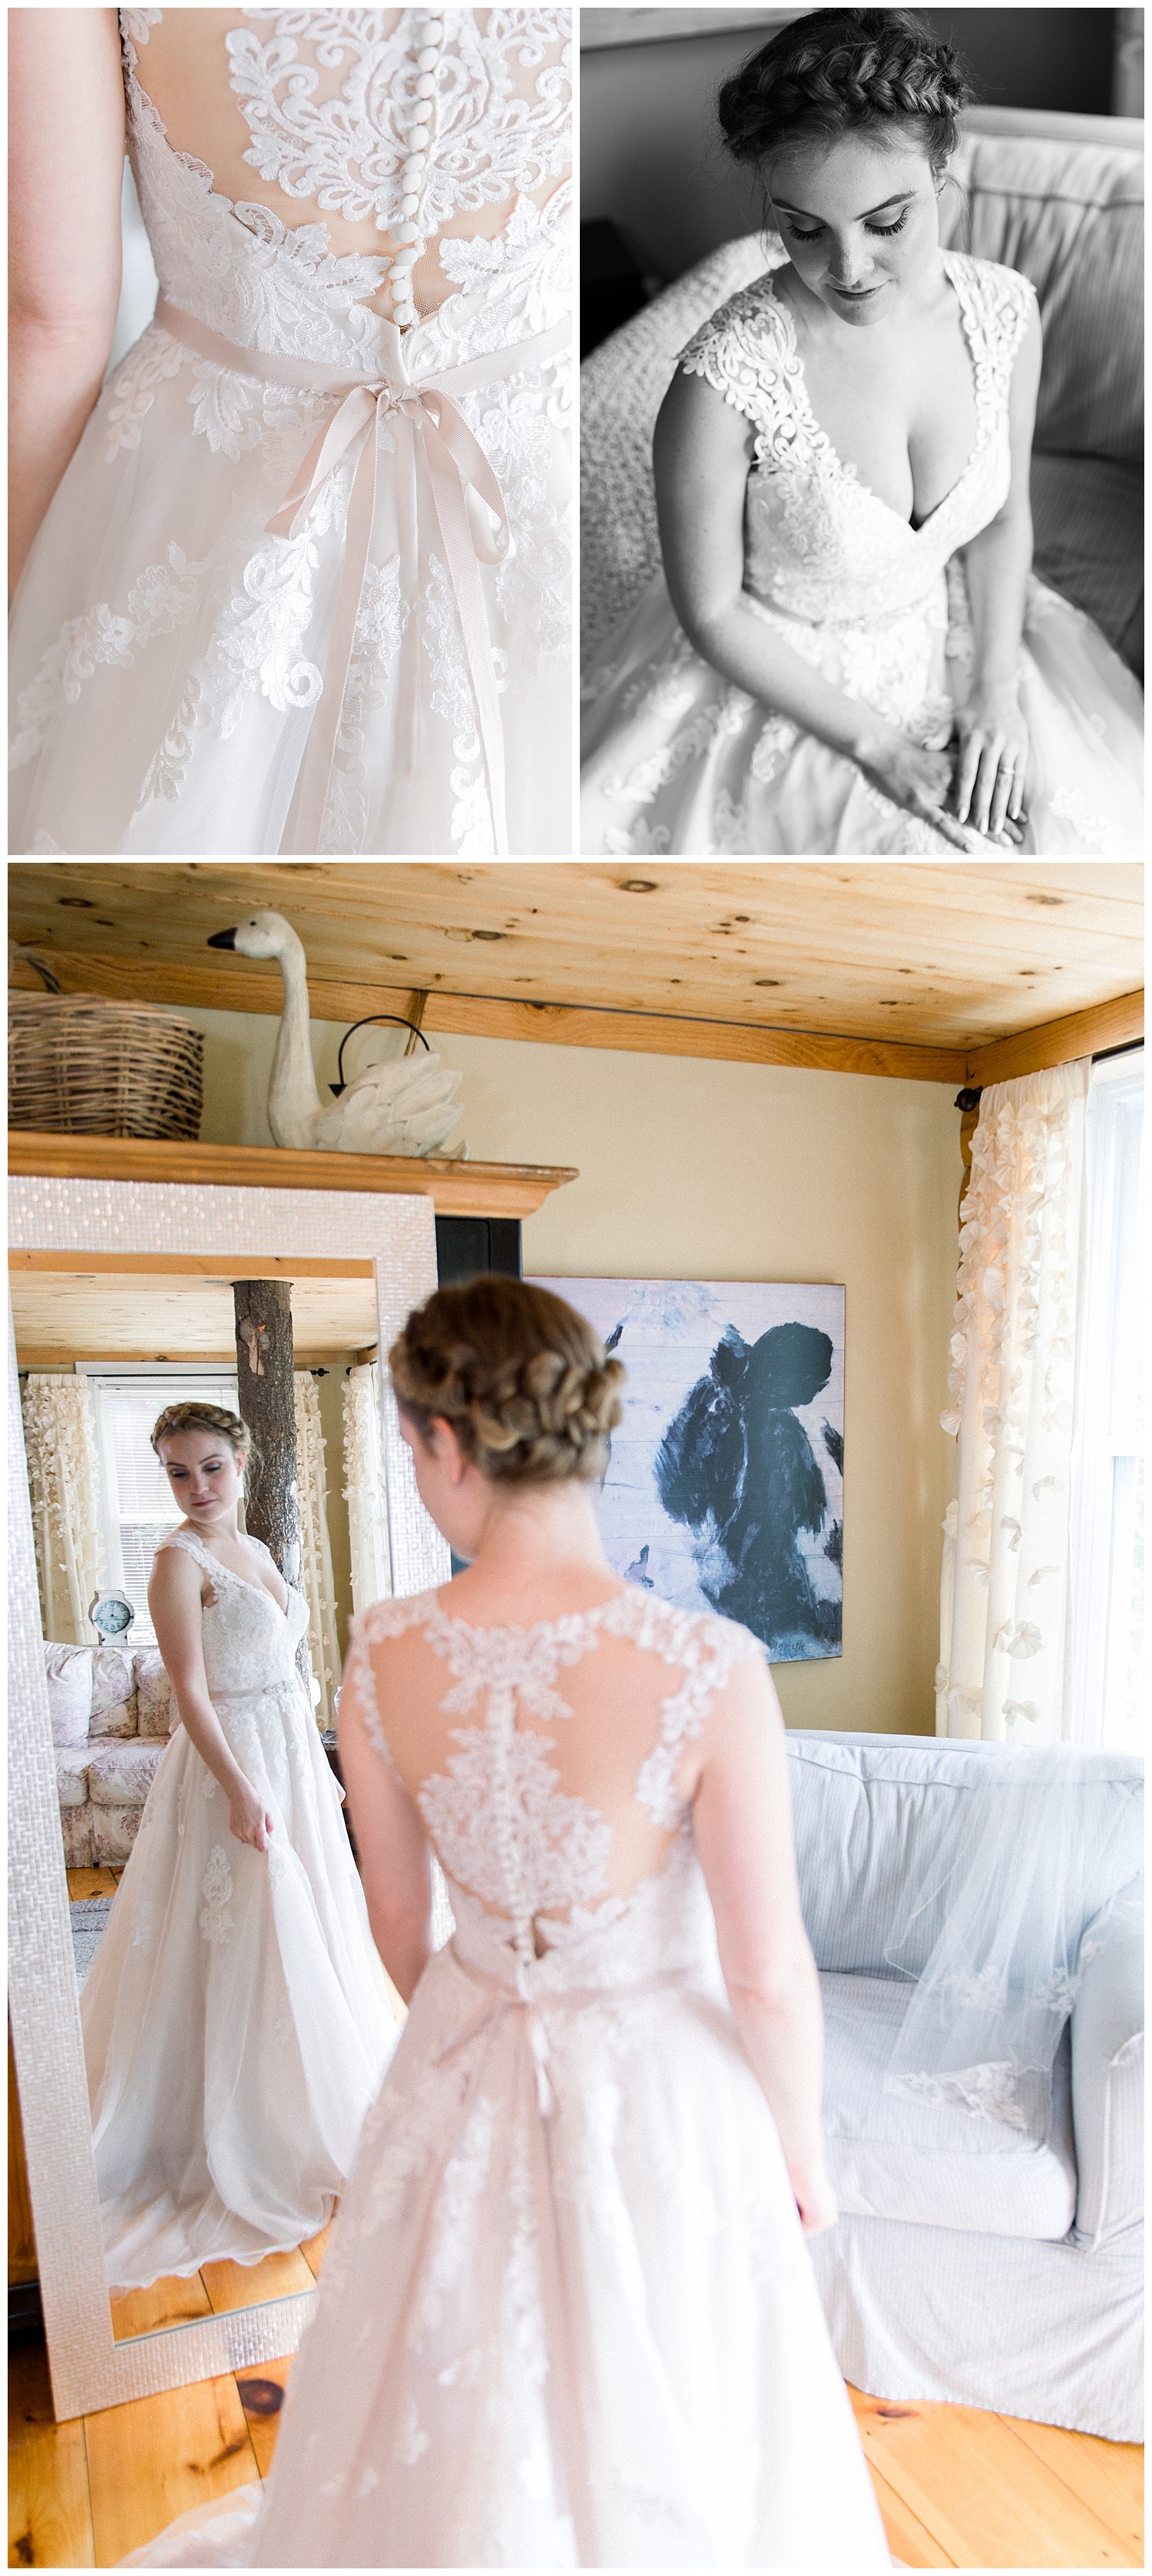 Stella York wedding gown at Goffstown, New Hampshire wedding at a private estate. Photography by Halie Olszowy.